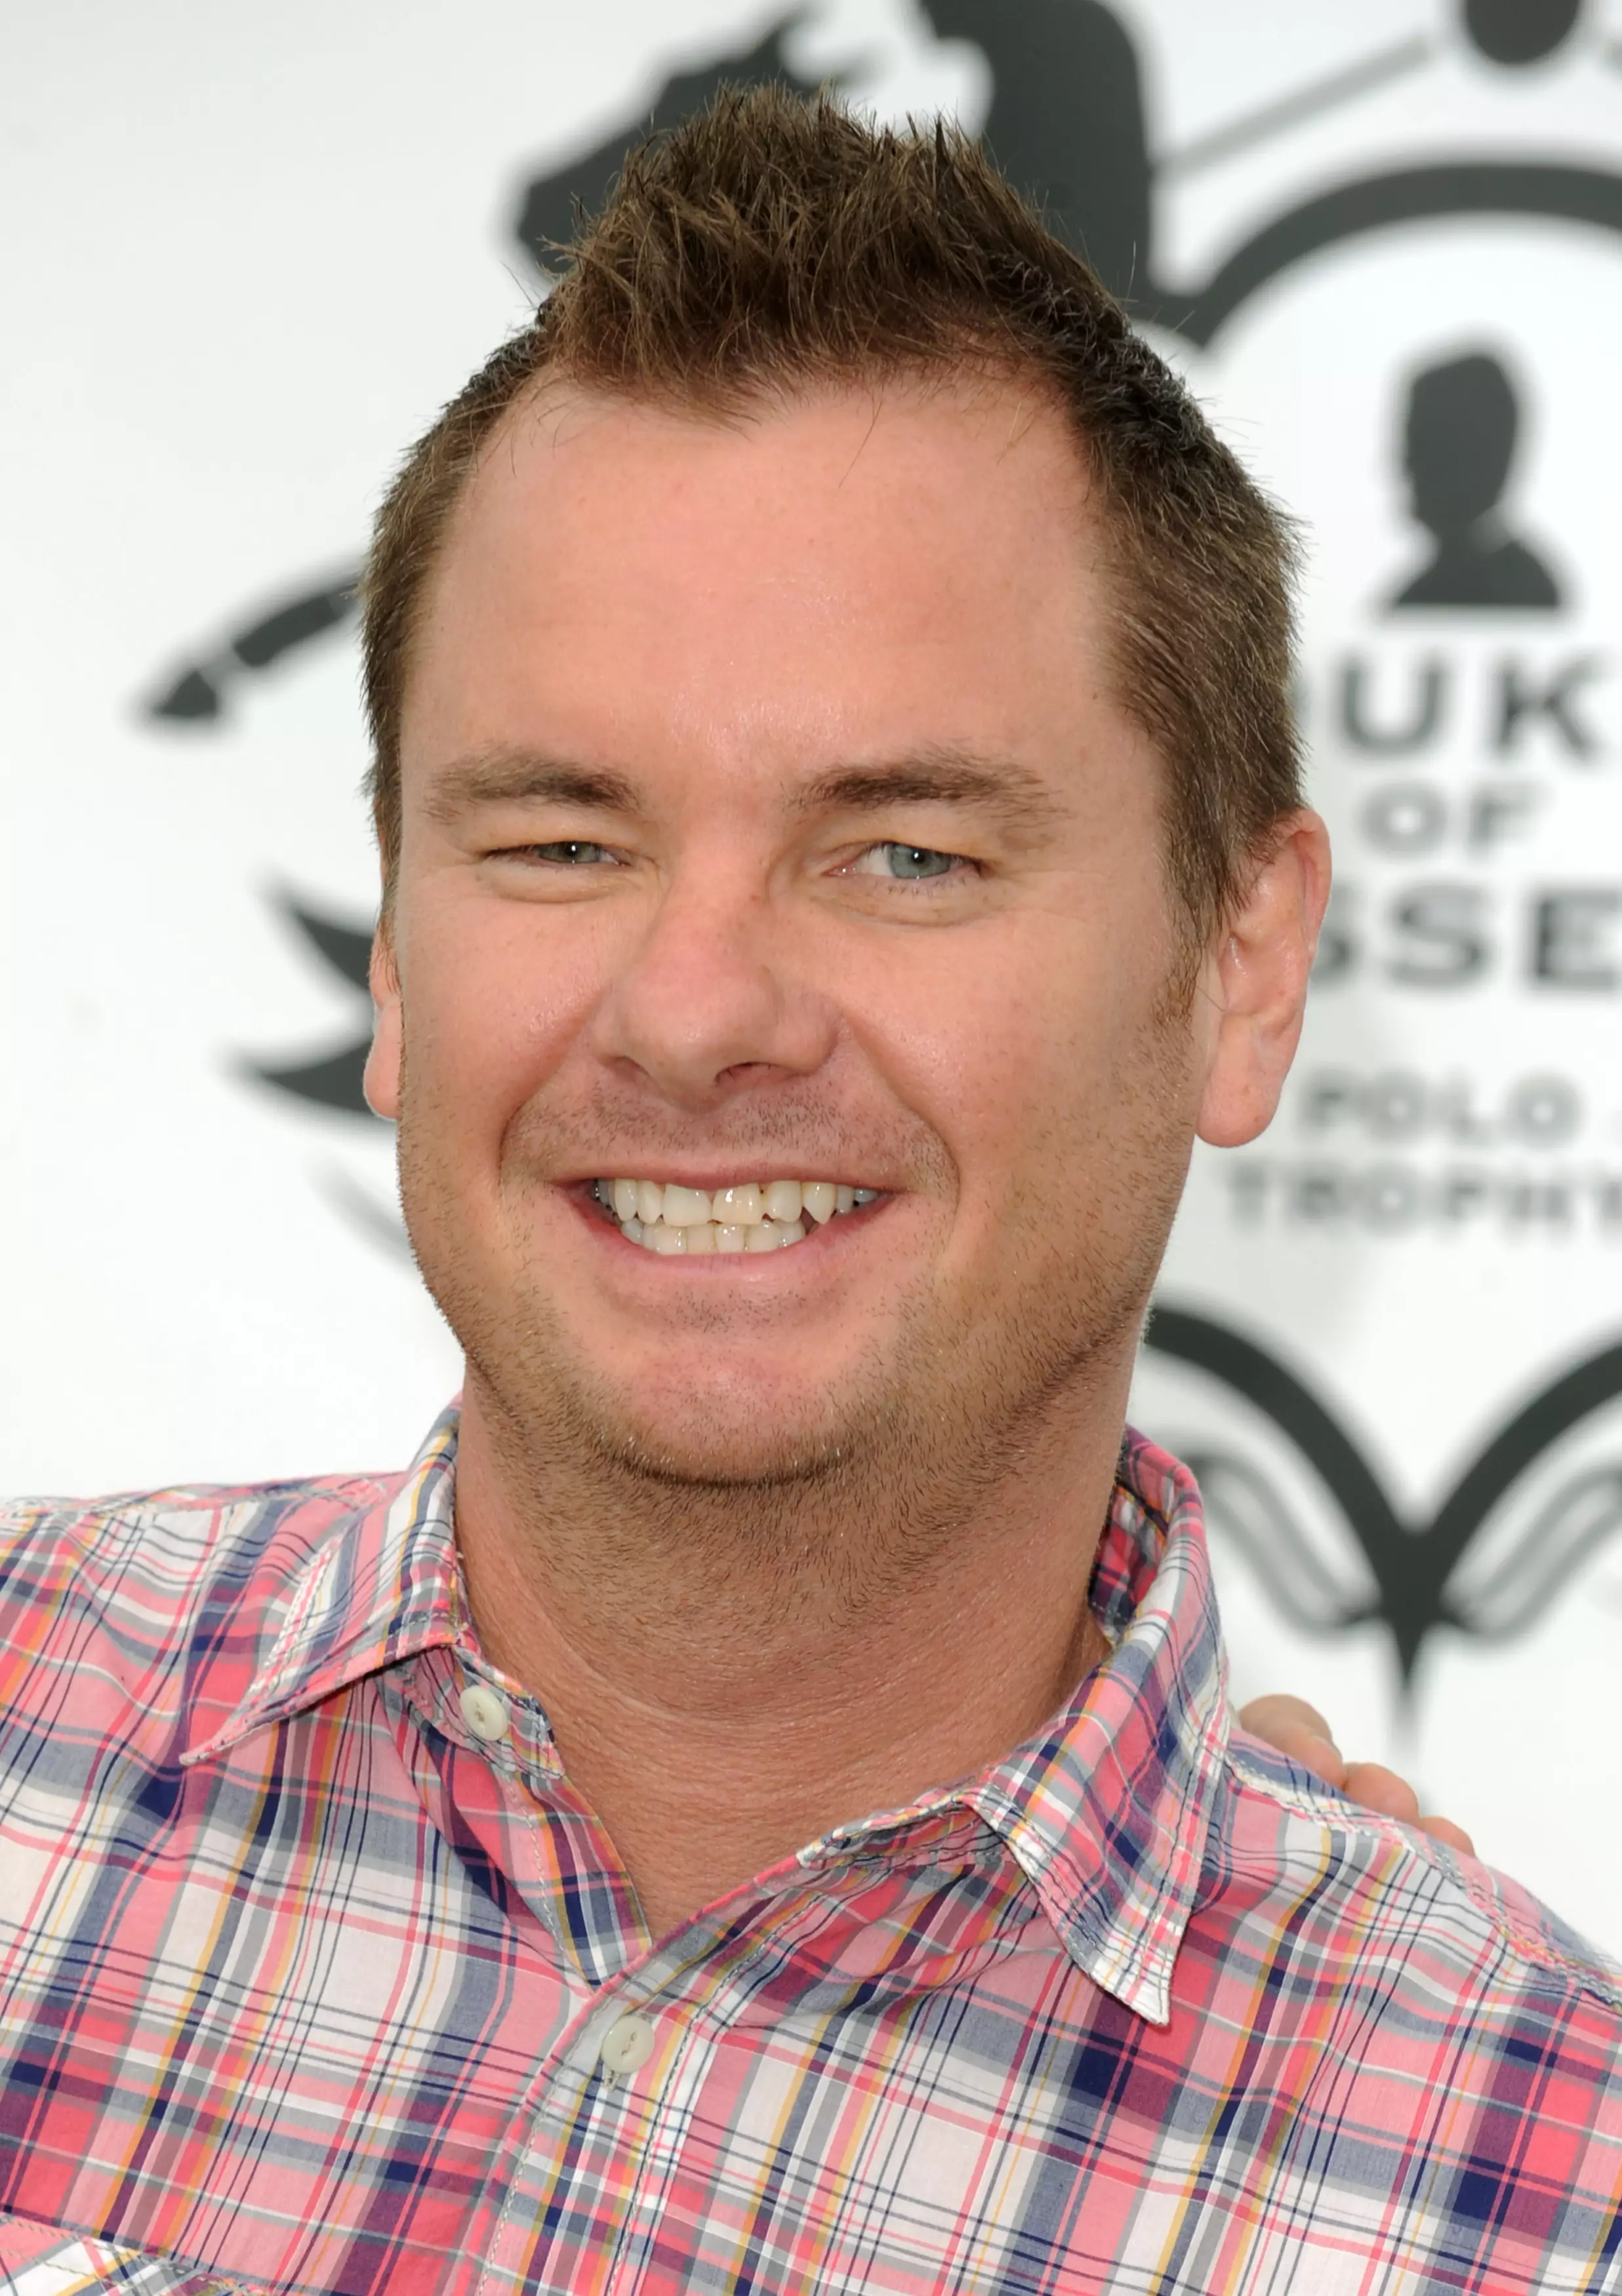 Tony Mortimer wrote the song after the death of his brother Ollie.